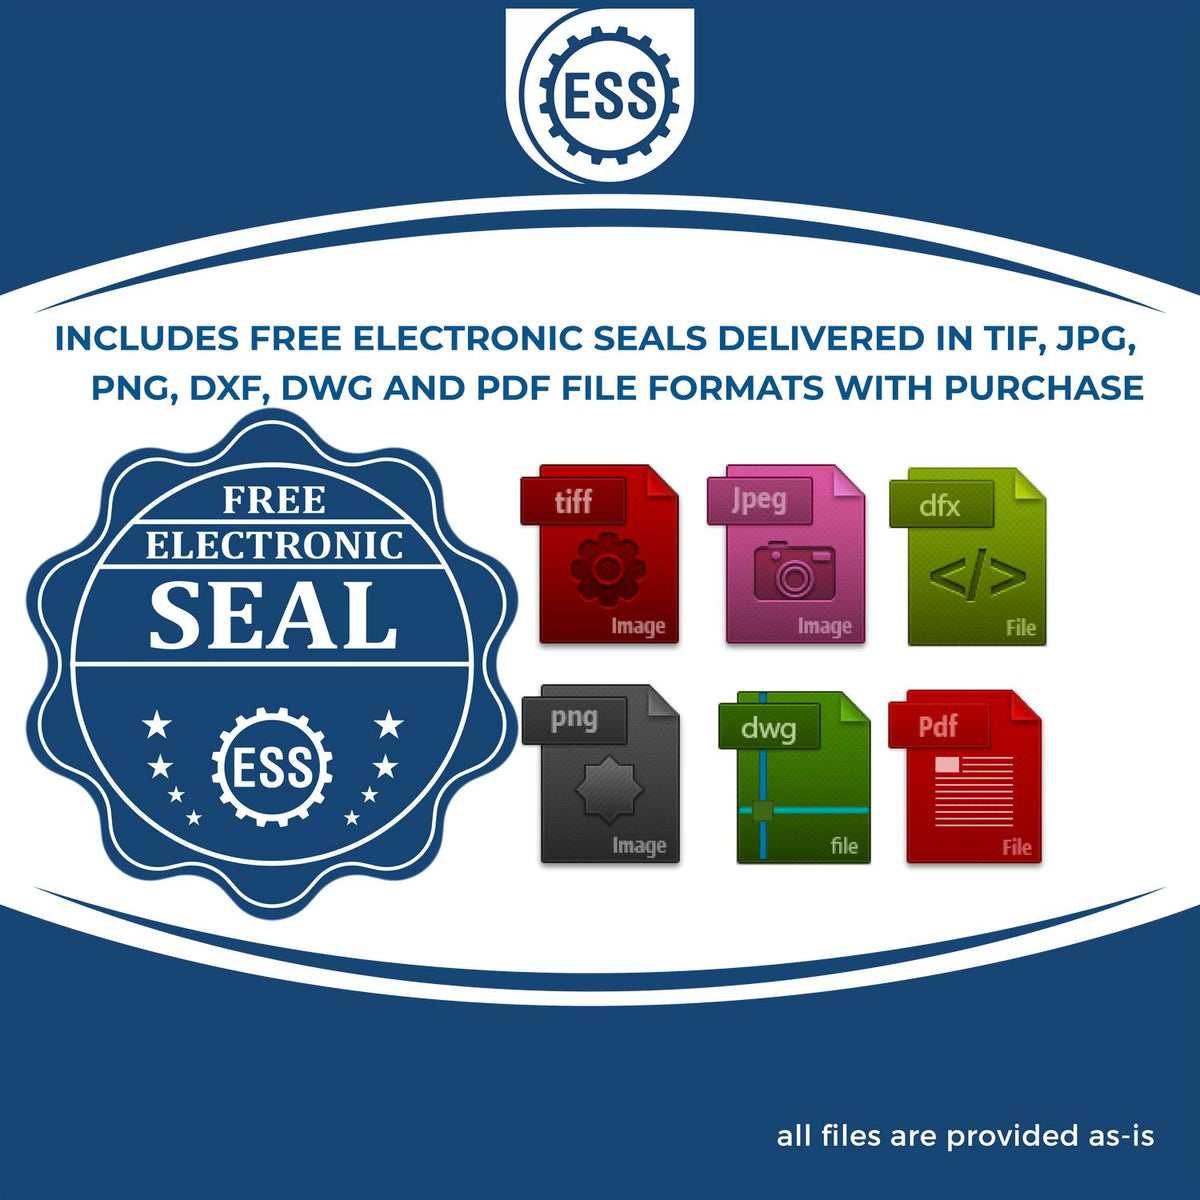 An infographic for the free electronic seal for the Gift Wyoming Geologist Seal illustrating the different file type icons such as DXF, DWG, TIF, JPG and PNG.